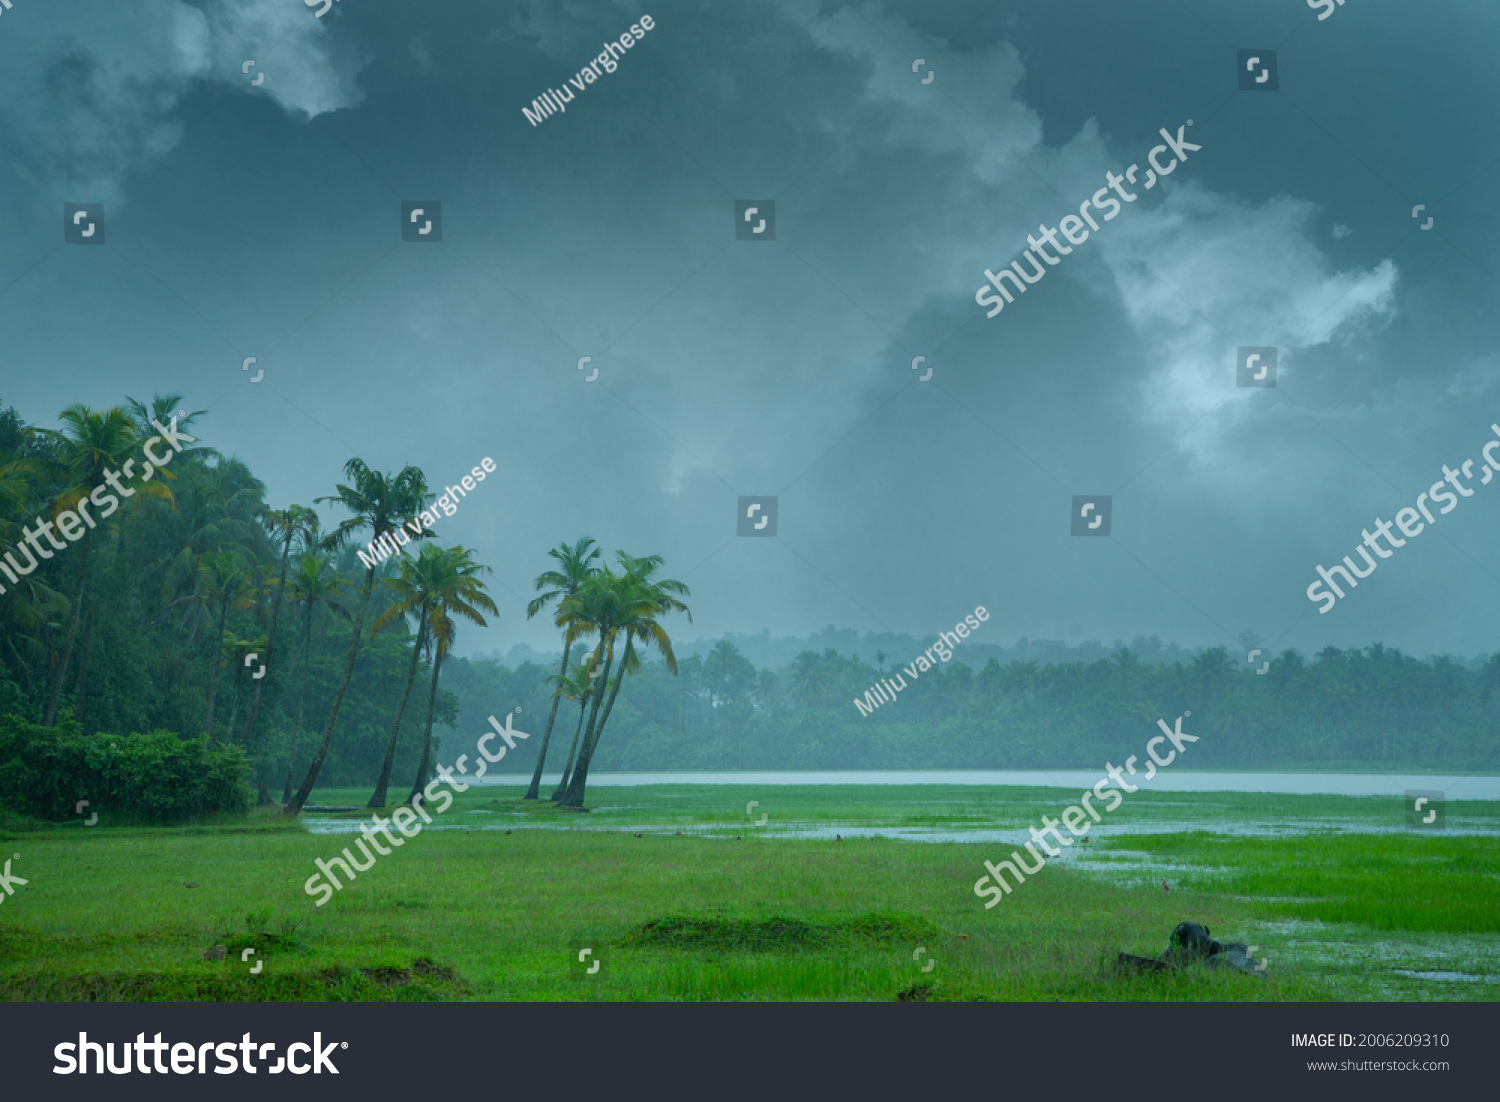 Monsoon hit Kerala - On a rainy day there are cocunt pam trees standing beside a paddy field,  Beautiful landscape photography in rany day, Monsoon photography in Kerala India #2006209310